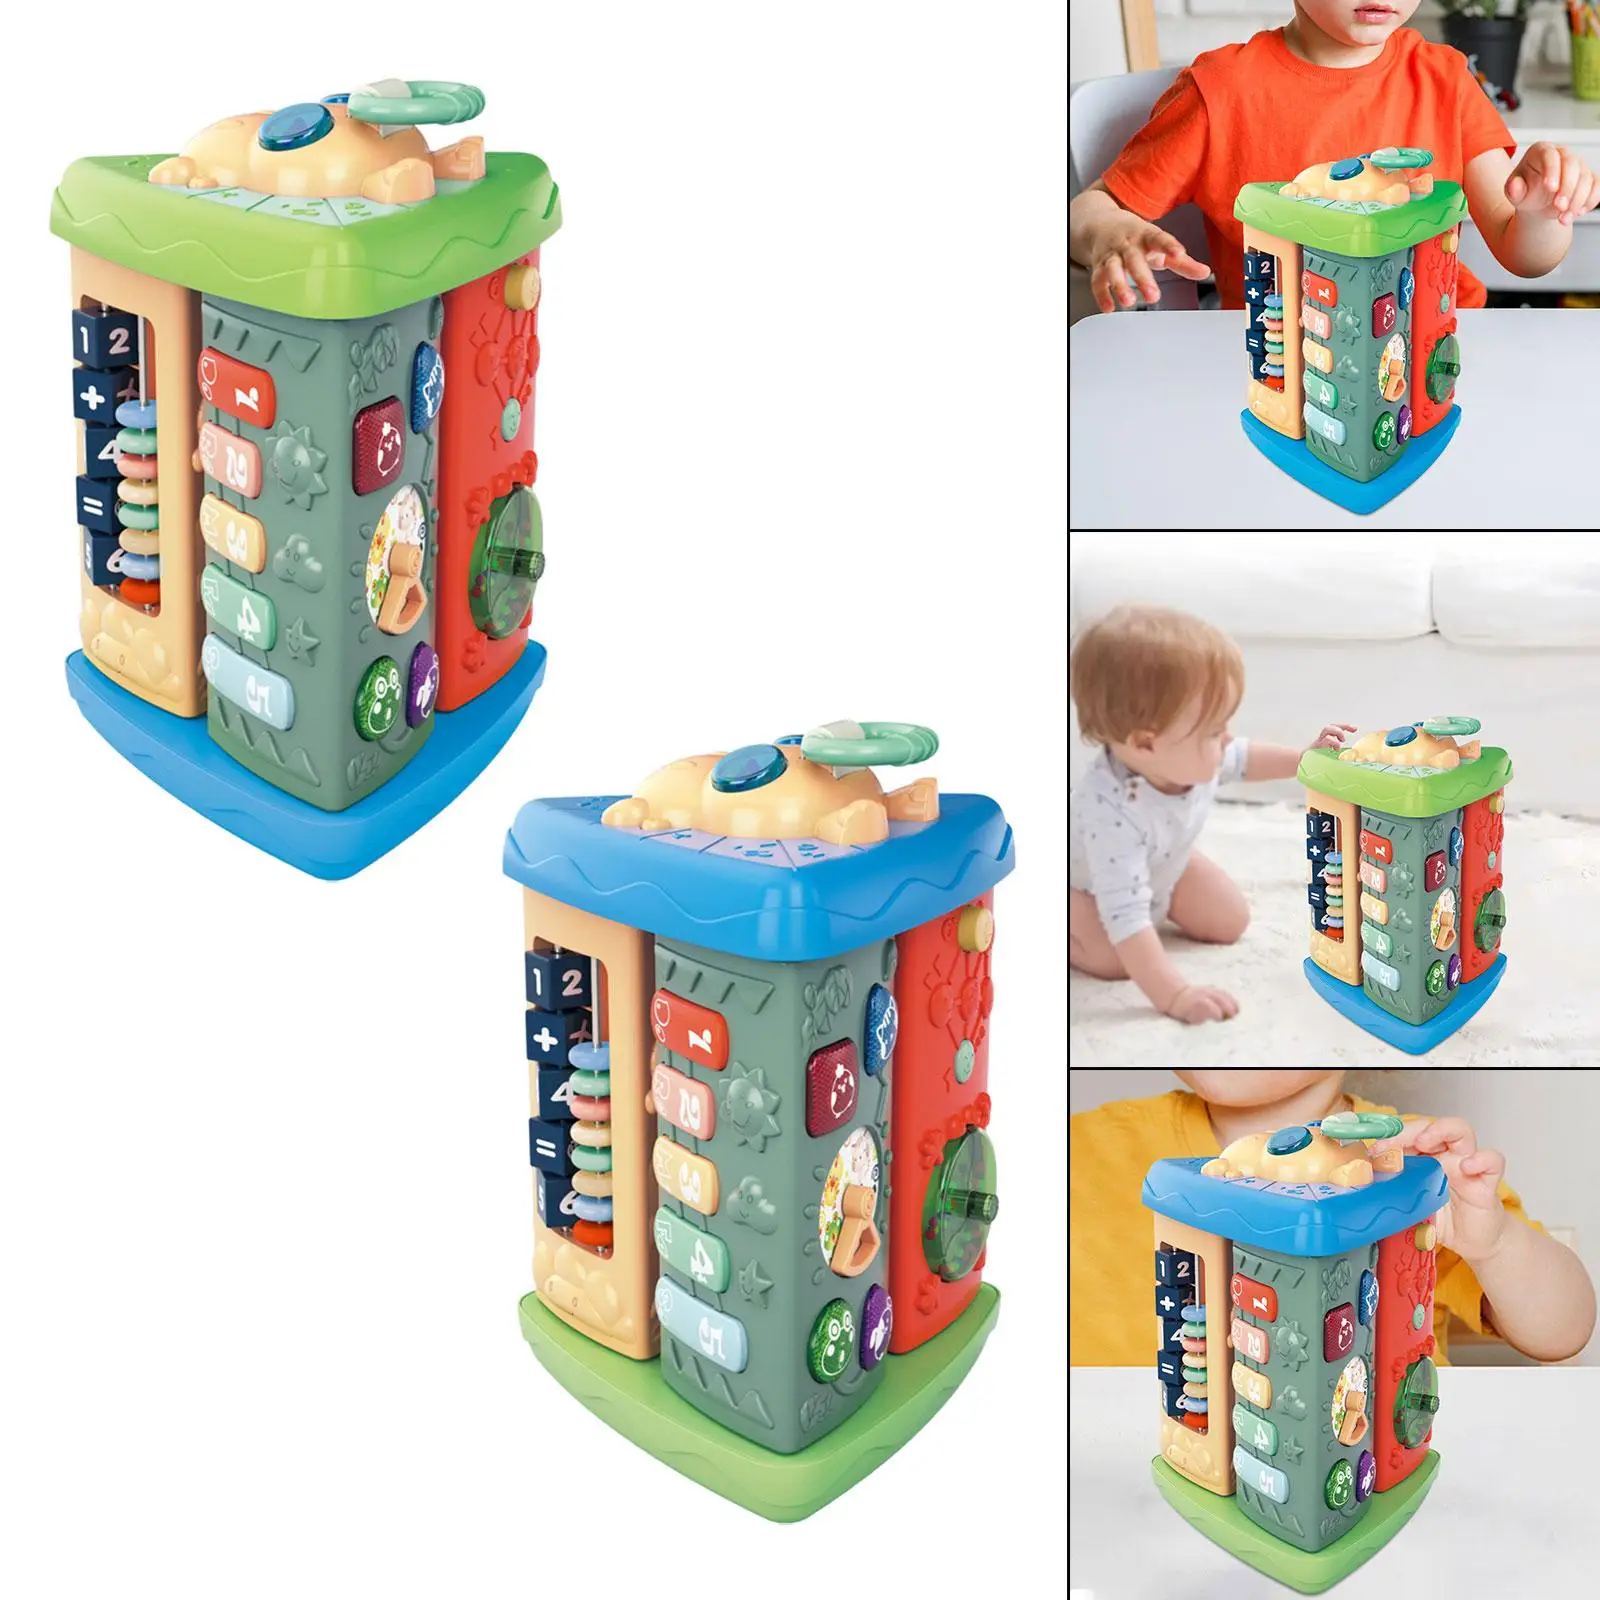 Musical Activity Toy Sensory Sound Toys Activity Cube Sound Busy Board for Kids 1 2 3 Preschool Birthday Gifts